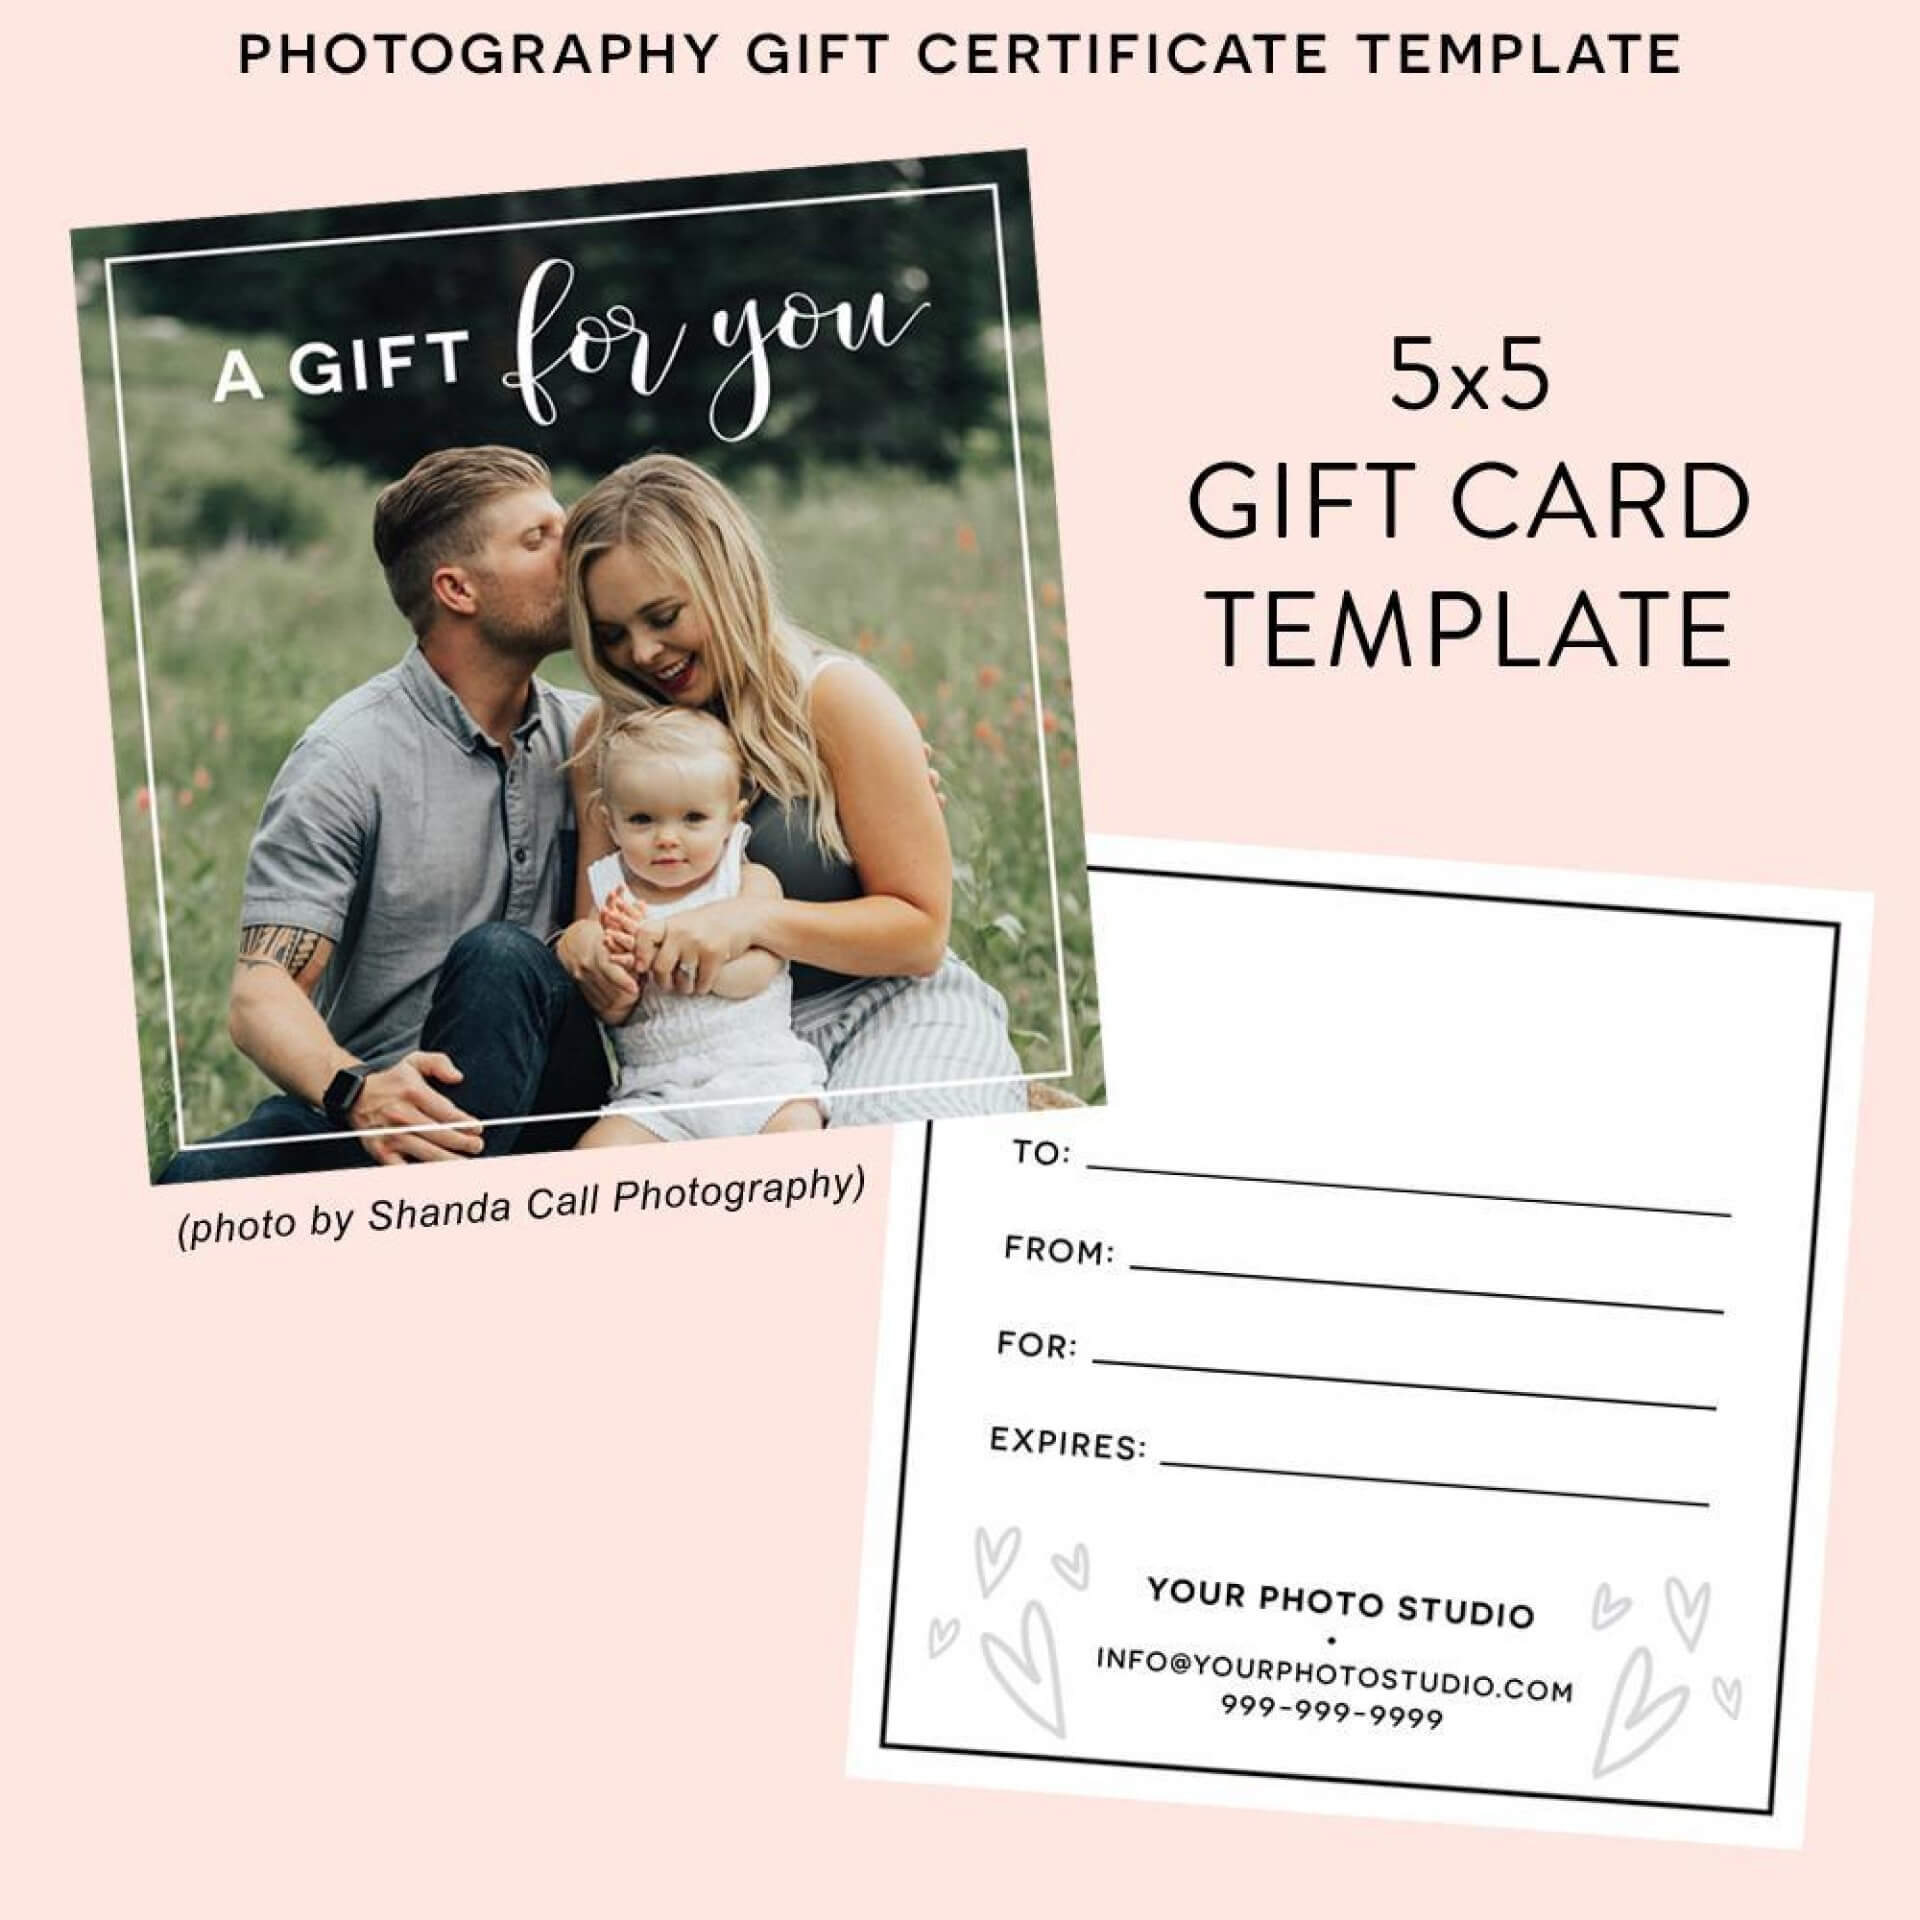 038 Photography Gift Certificate Template Photoshop Free With Regard To Gift Certificate Template Photoshop